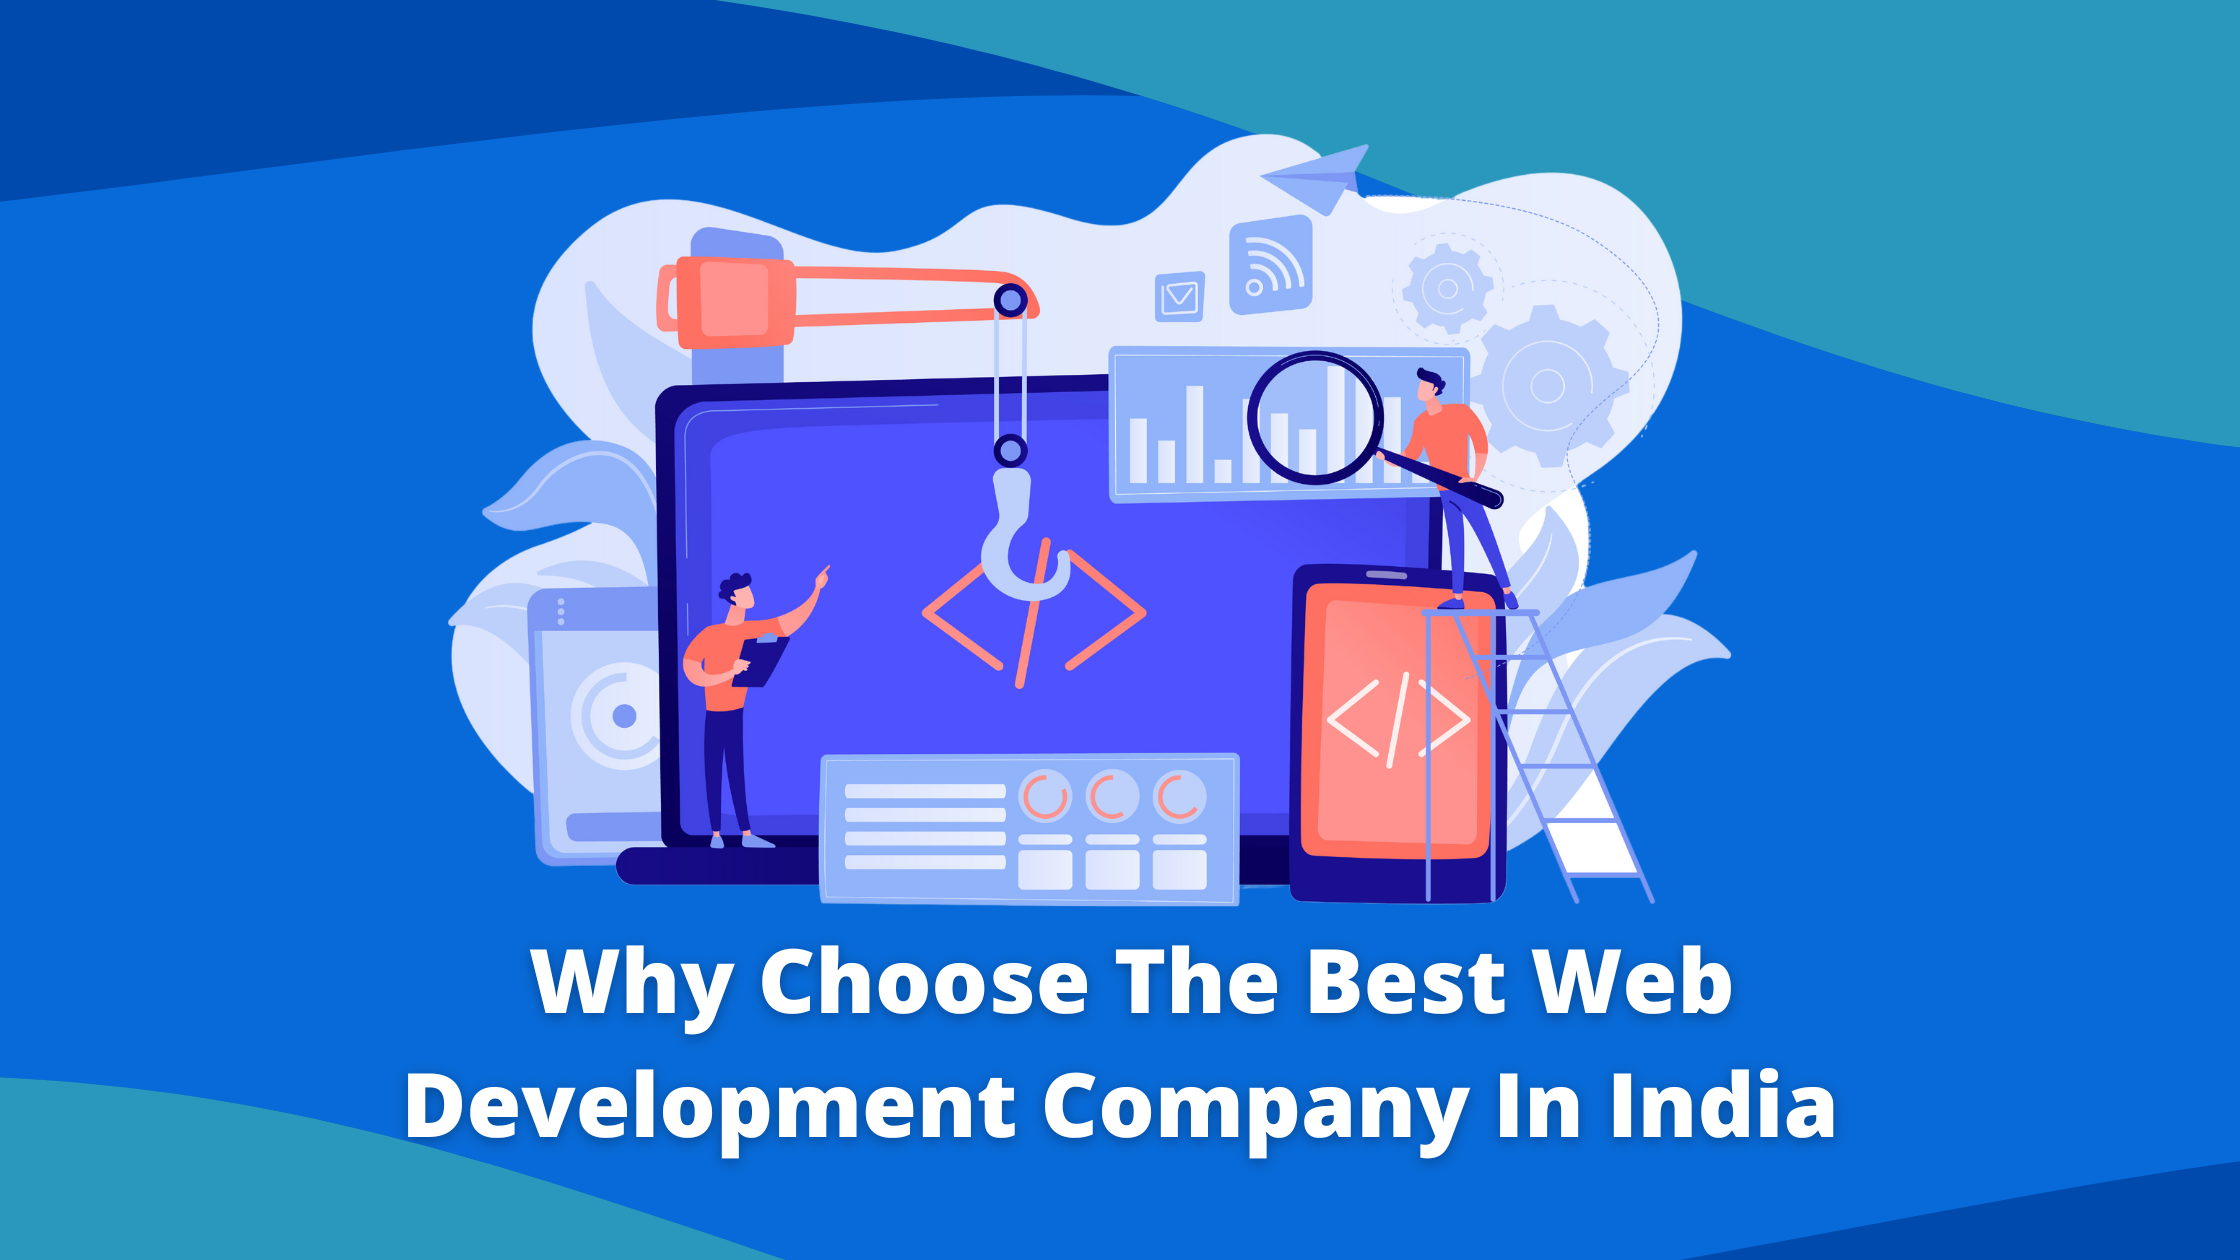  Why Choose the Best Web Development Company In India